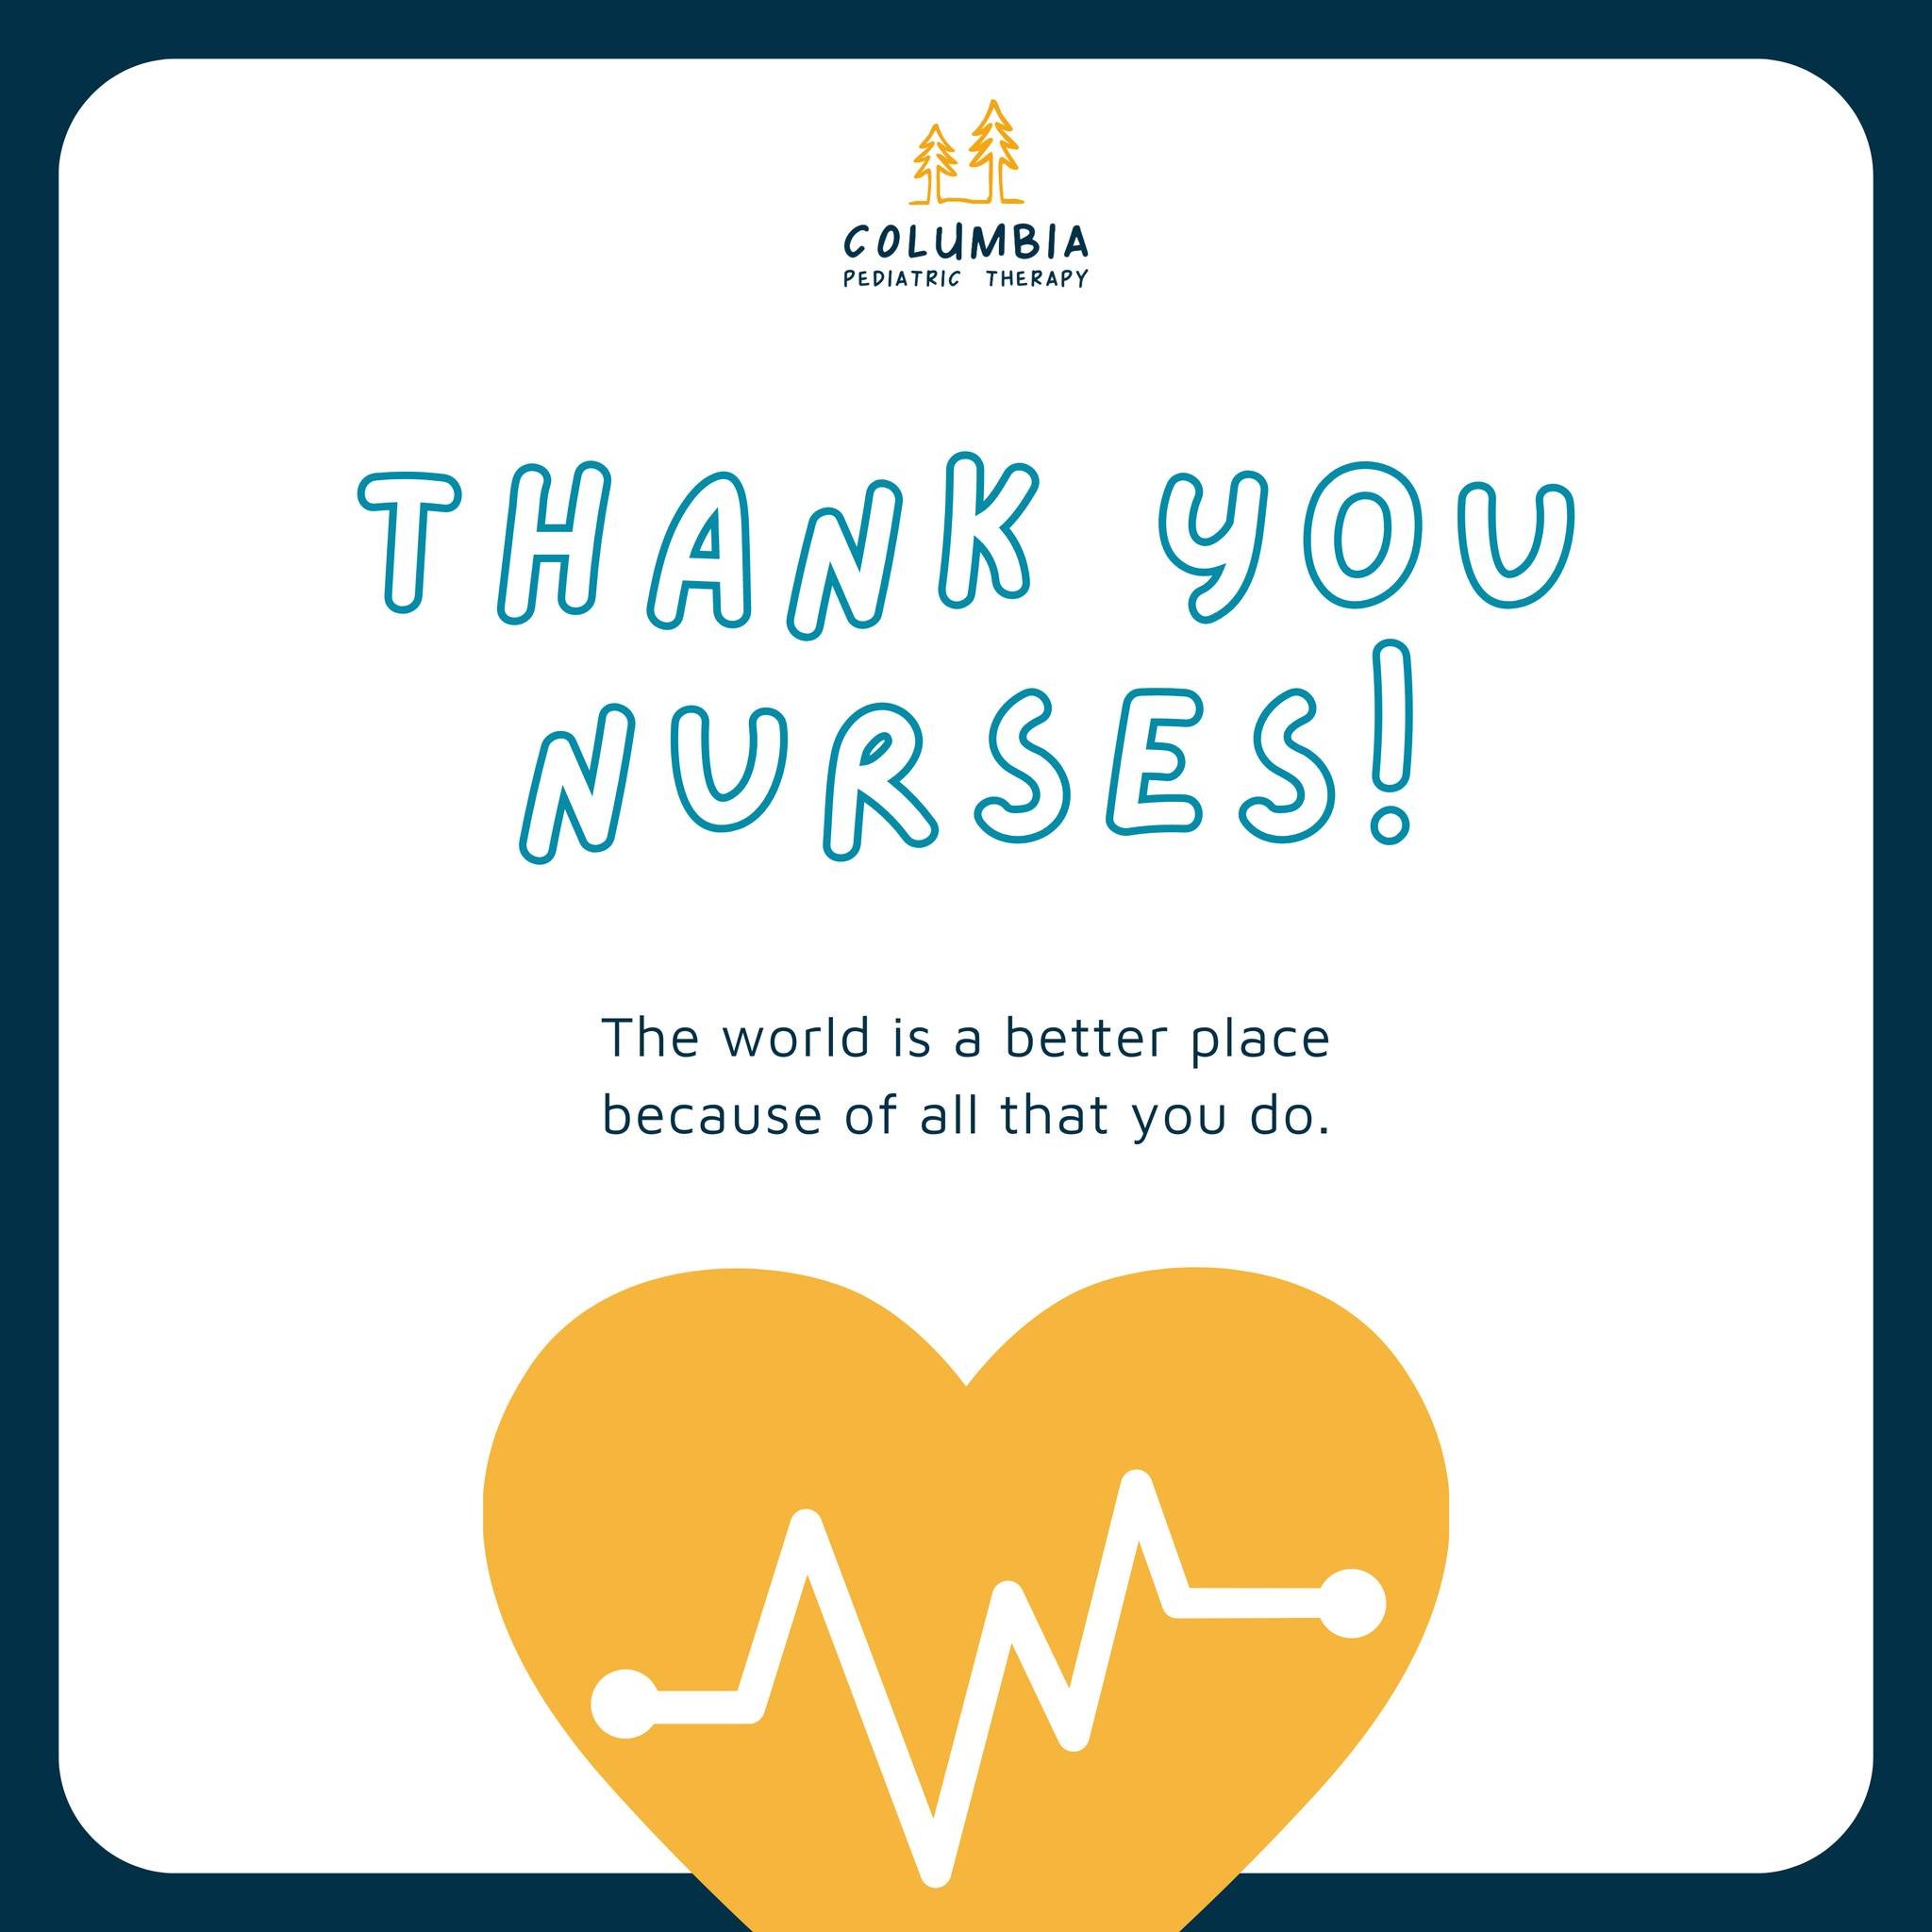 On National Nurses Day, we want to take a moment to express our deepest gratitude to the nurses who go above and beyond to provide exceptional care to patients around the clock. Your hard work, resilience, and empathy do not go unnoticed. Thank you f